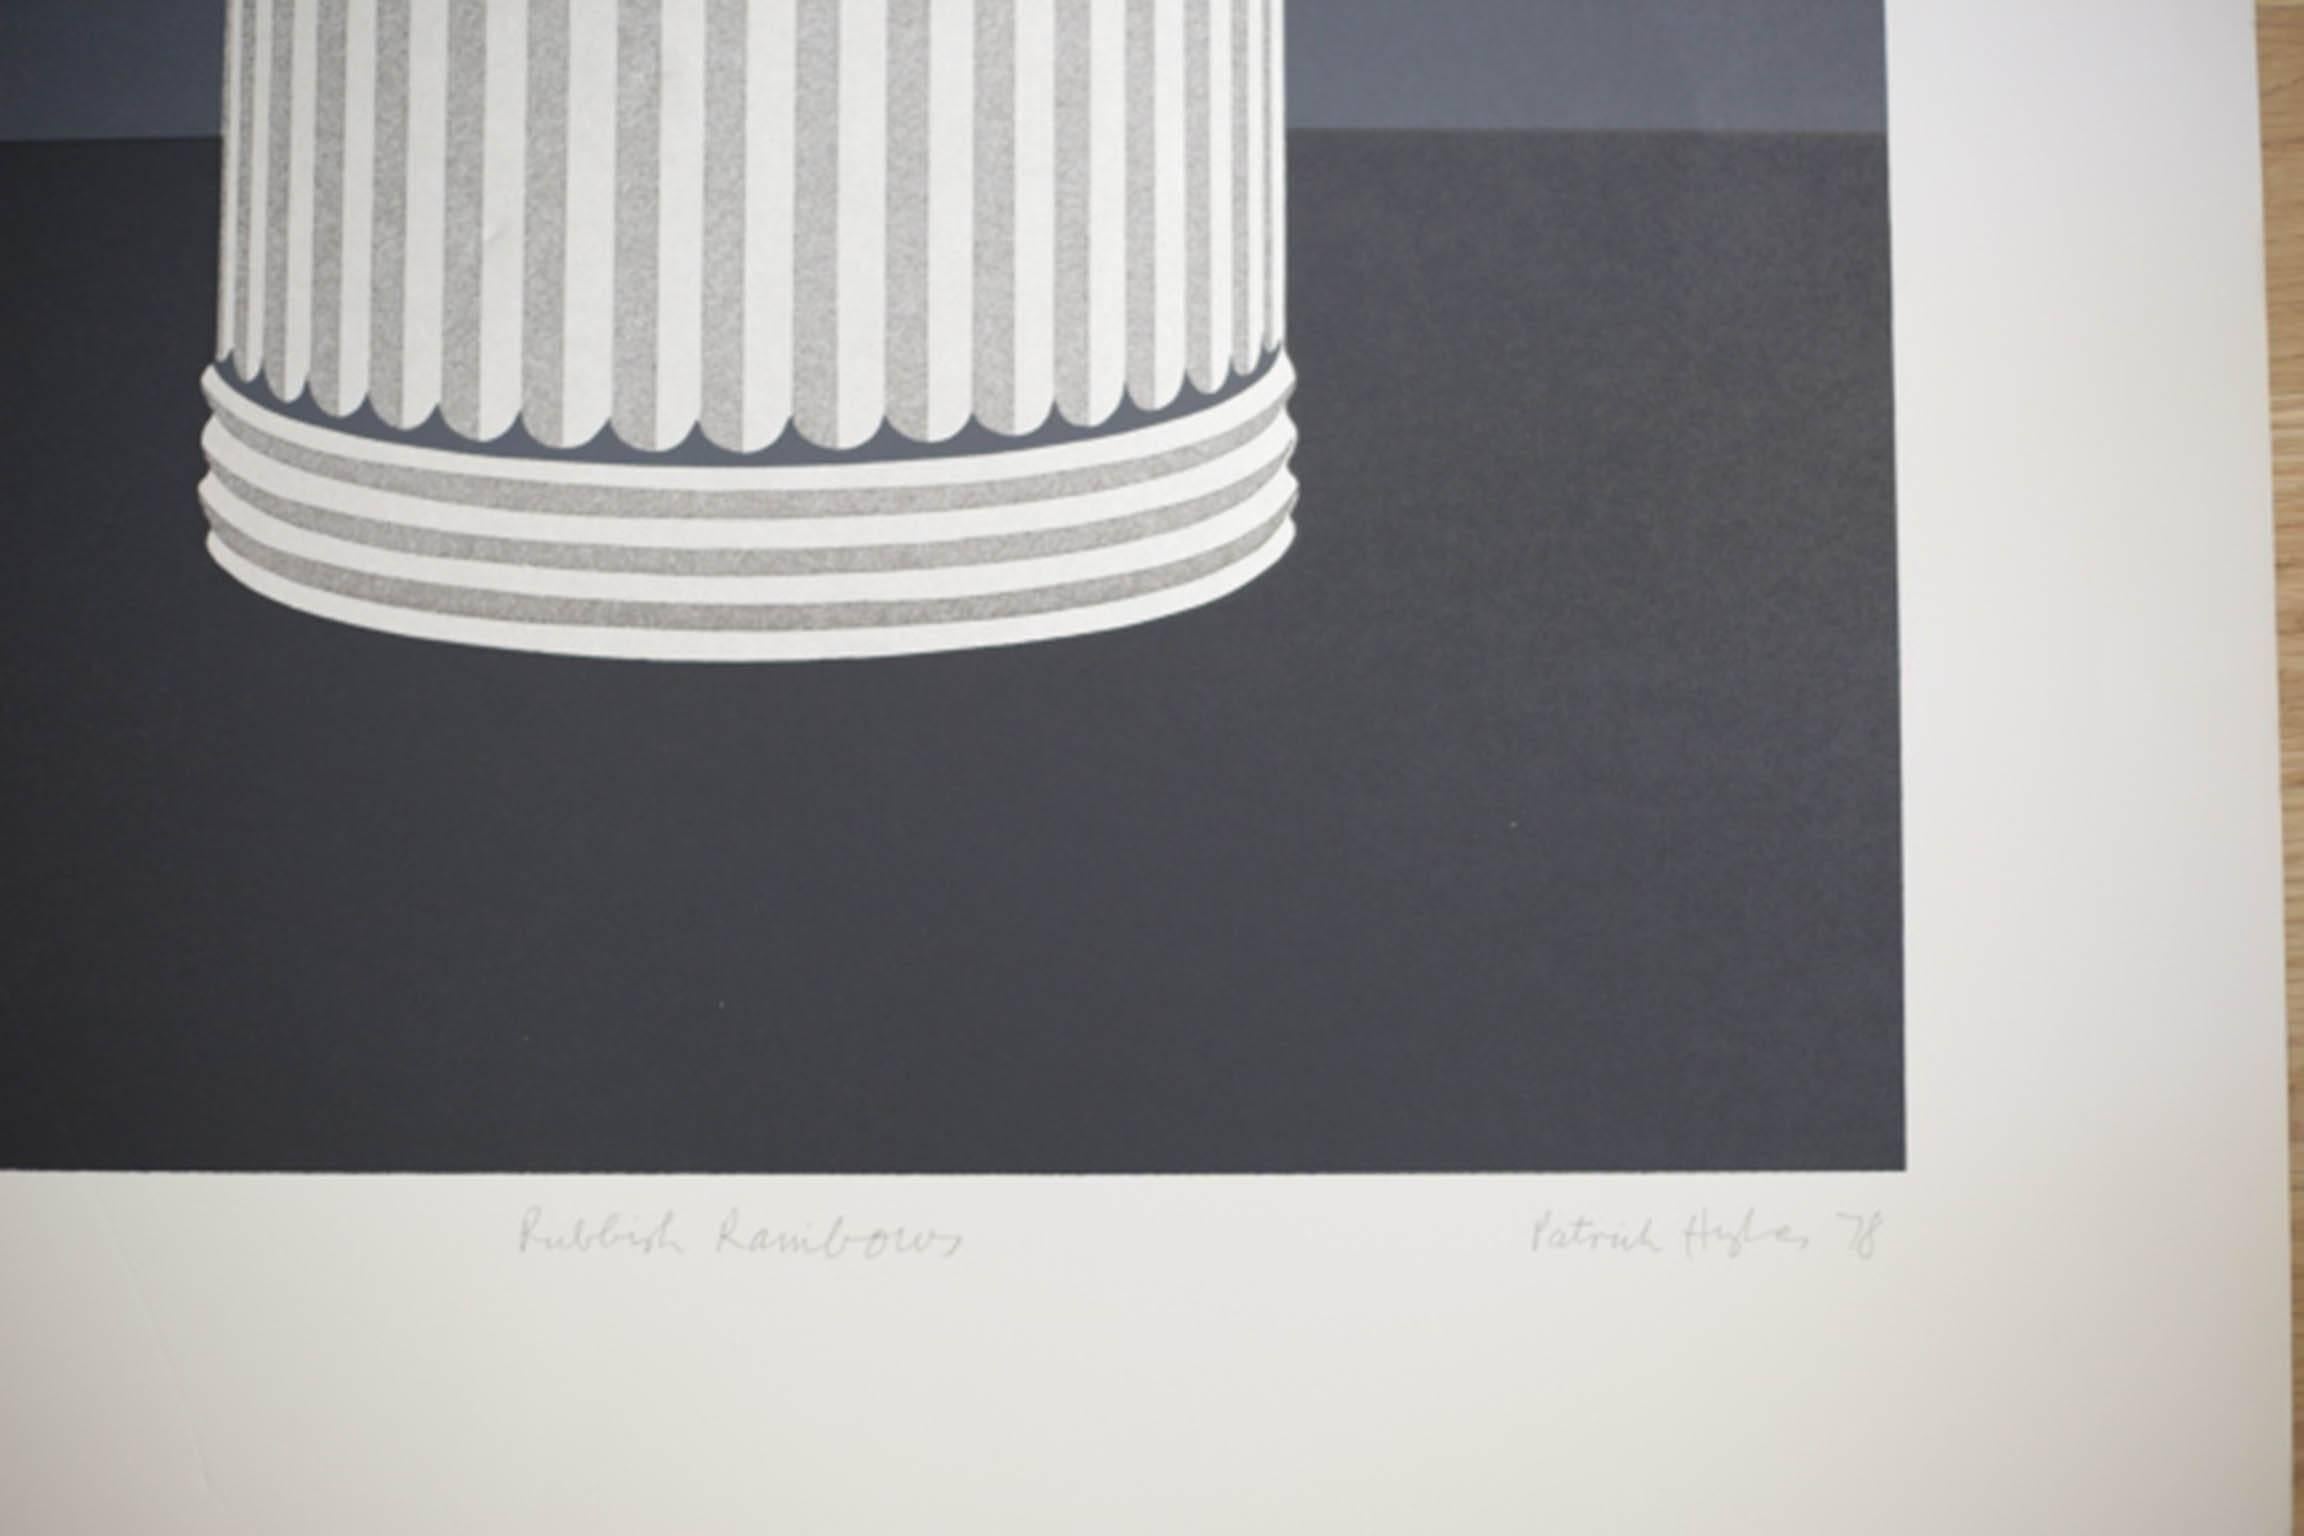 Artist: Patrick Hughes, British (1939)
Title: Rainbows Rainbow’s
Year: 1978
Medium: Silkscreen, signed and numbered in pencil #86/100
Image: 29